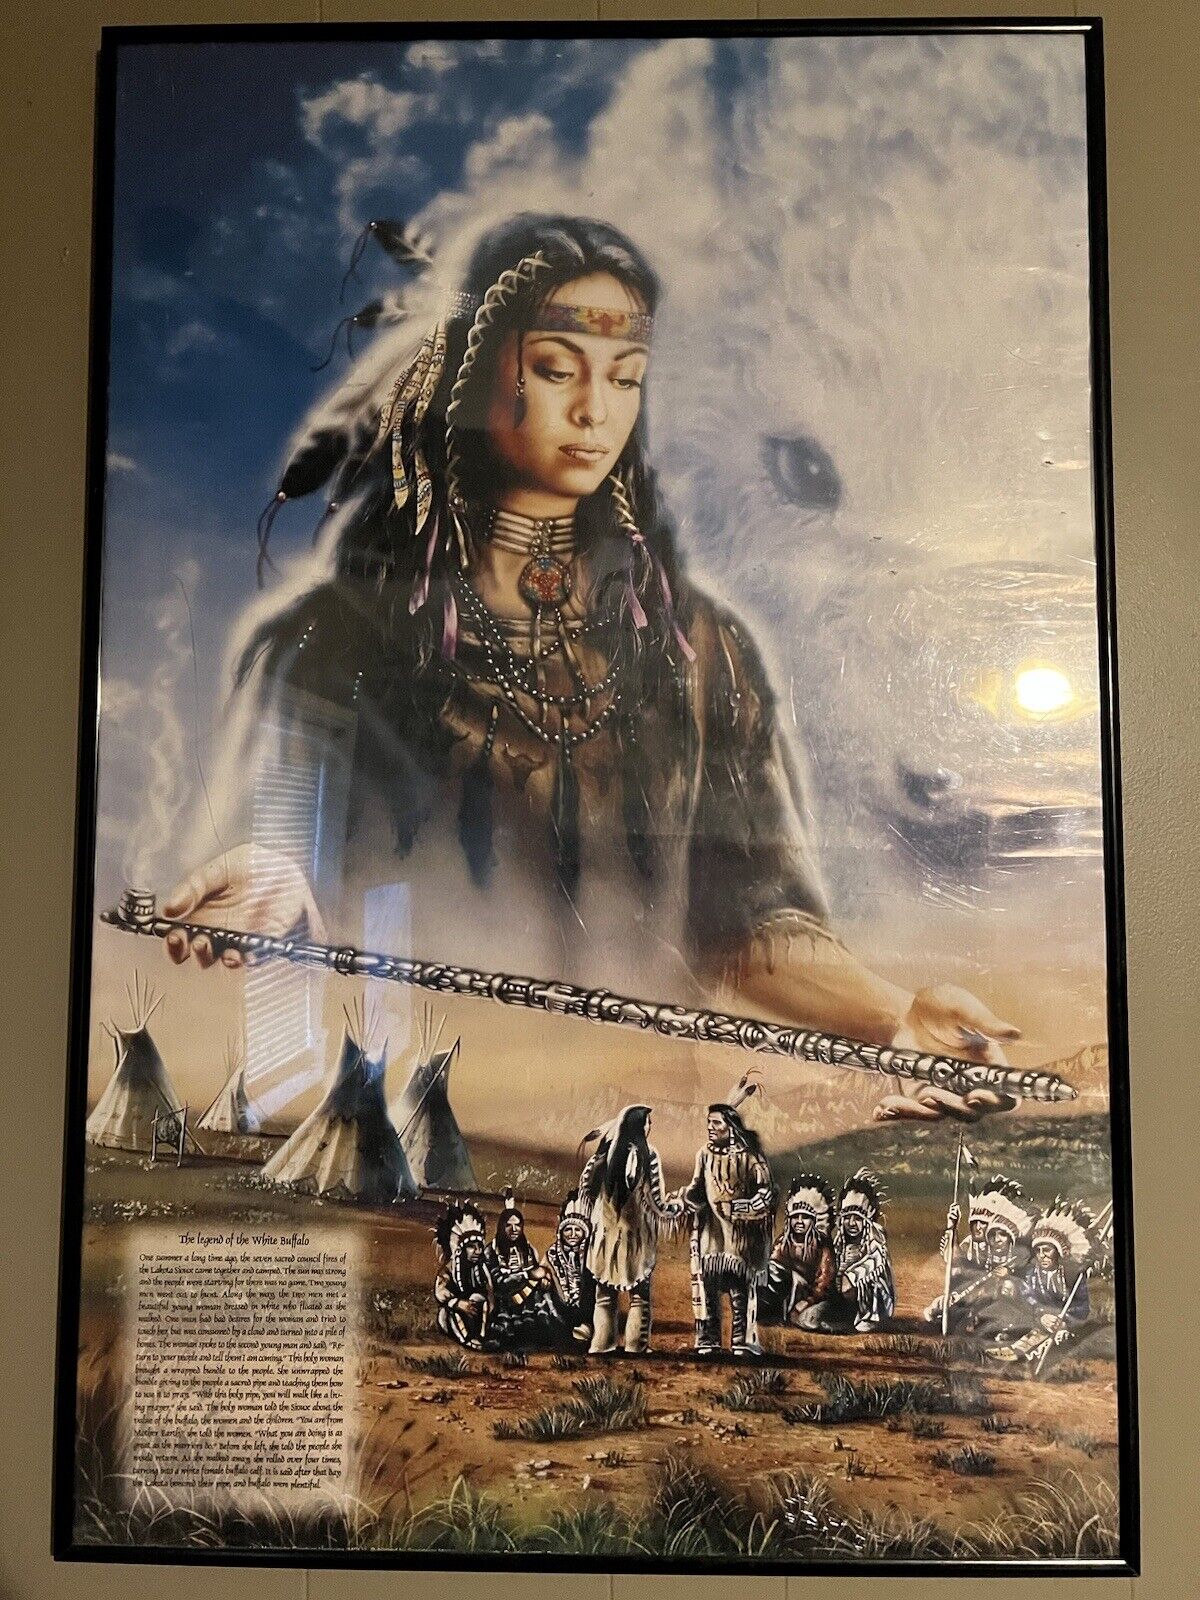 Framed 36”x24” Legend Of The White Buffalo Native American Poster